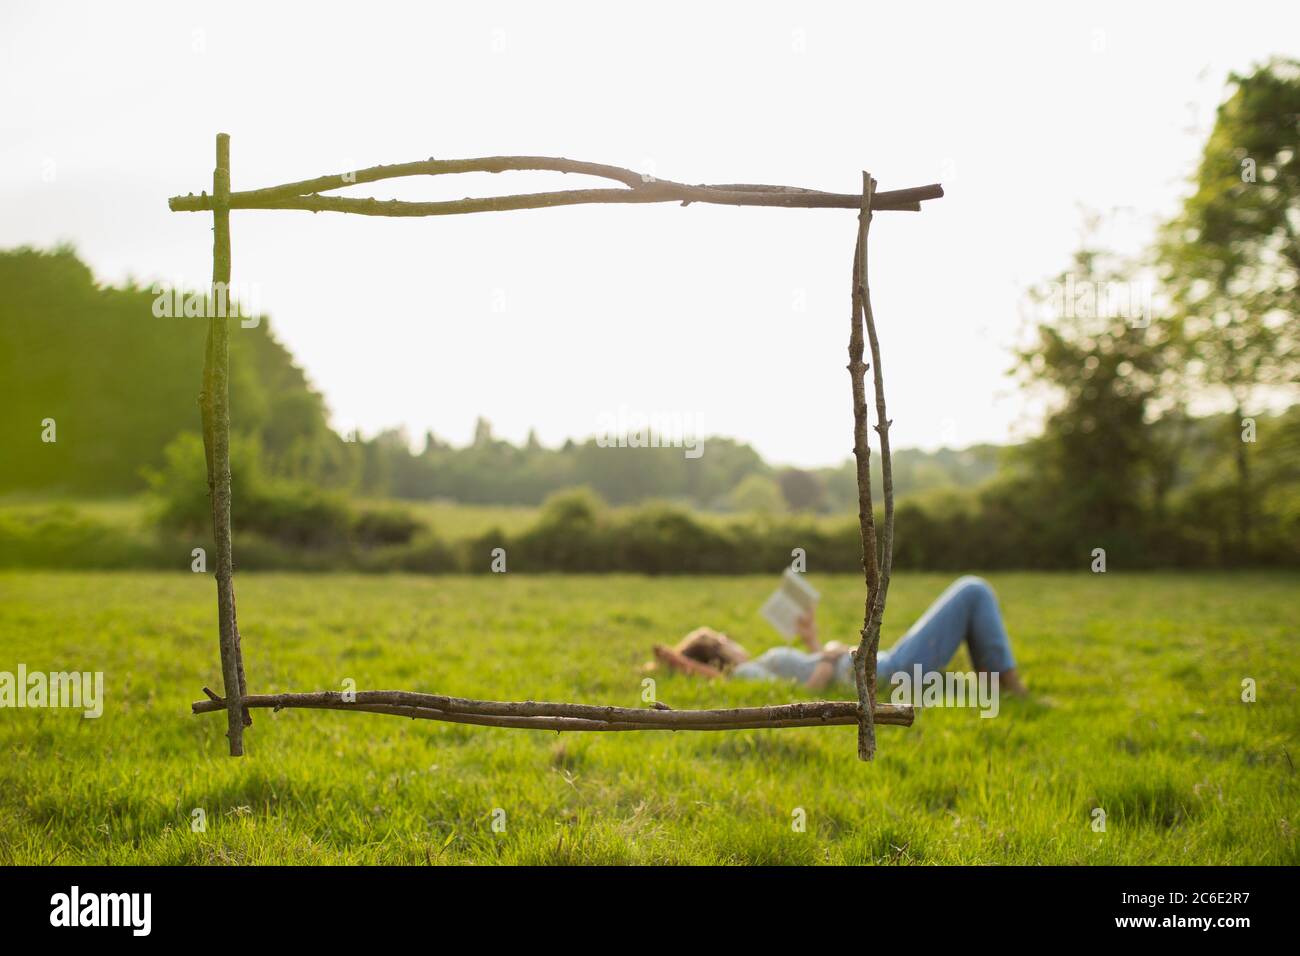 Branch frame over woman reading book in idyllic grass field Stock Photo